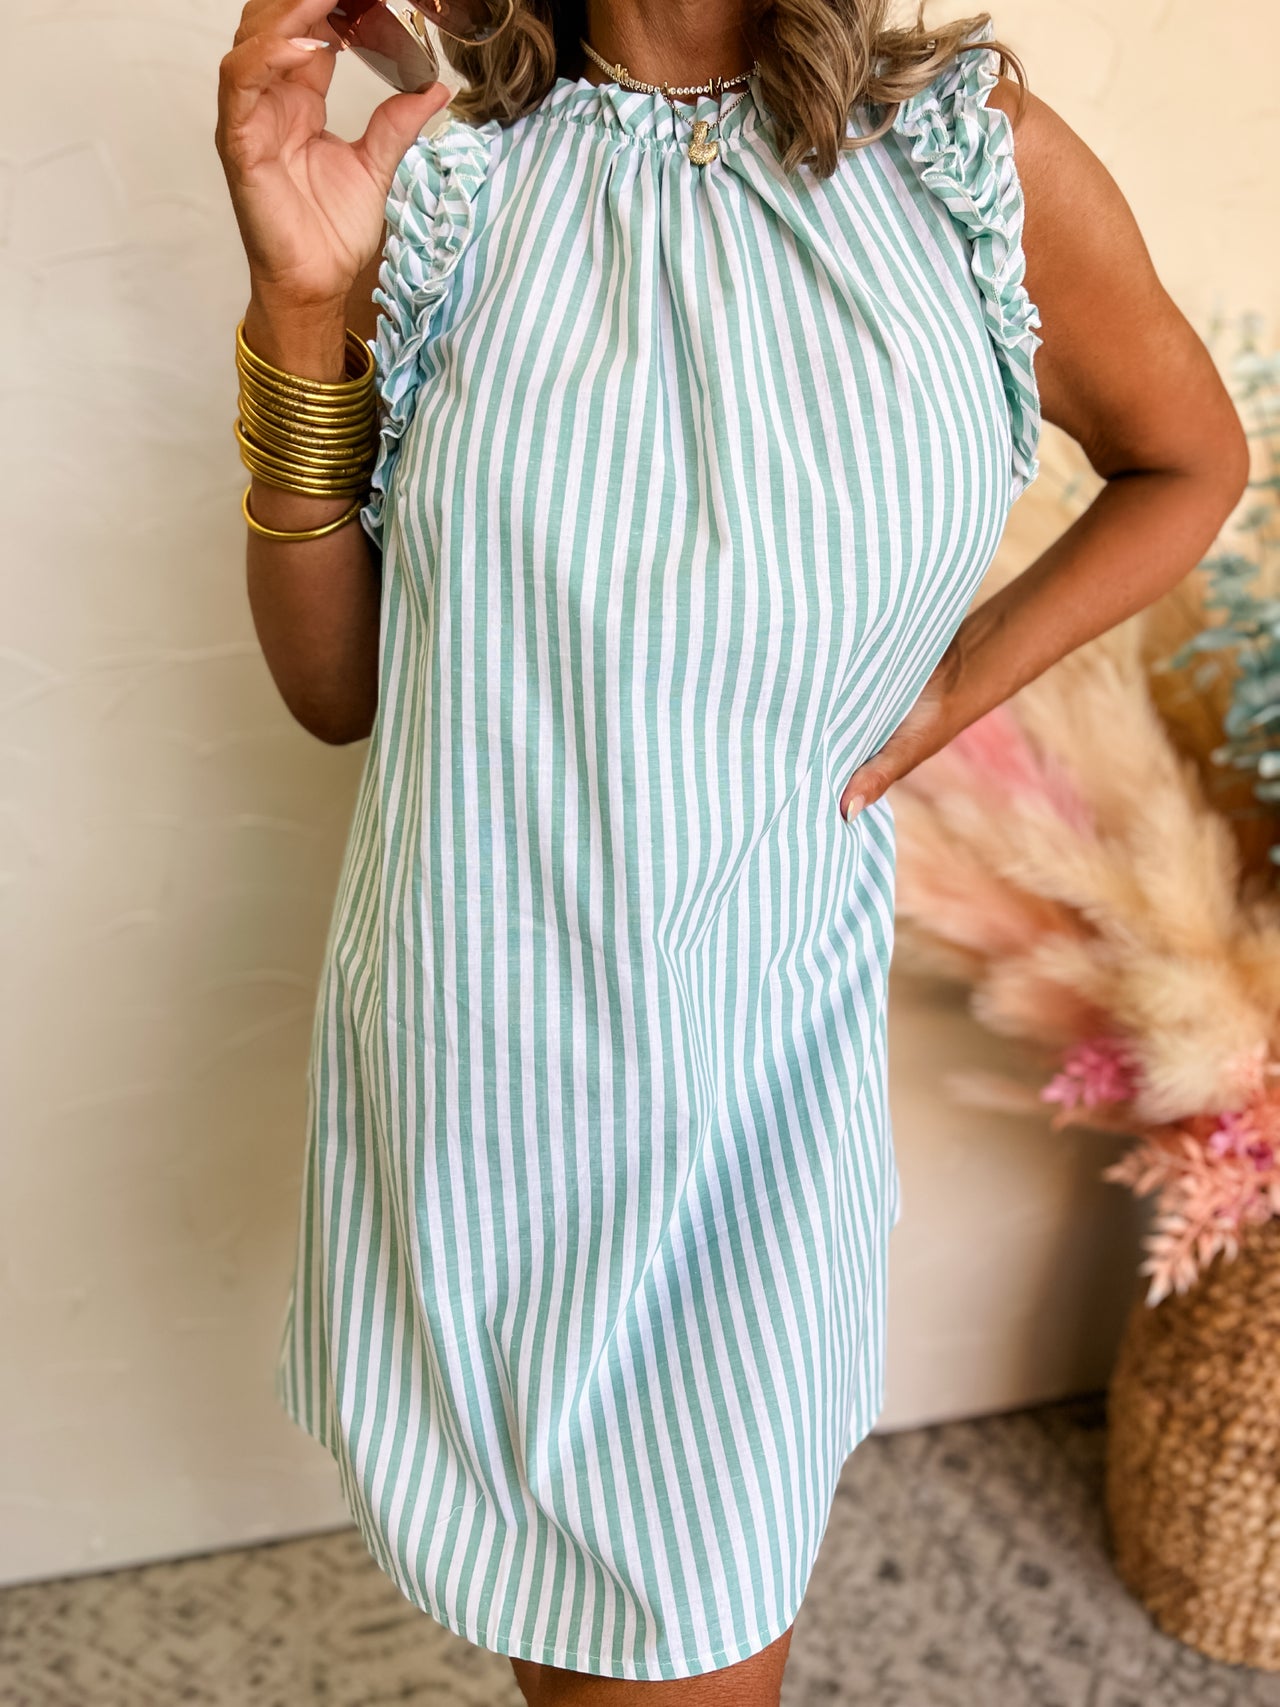 Meant To Be Yours Stripe Ruffle Neck Dress